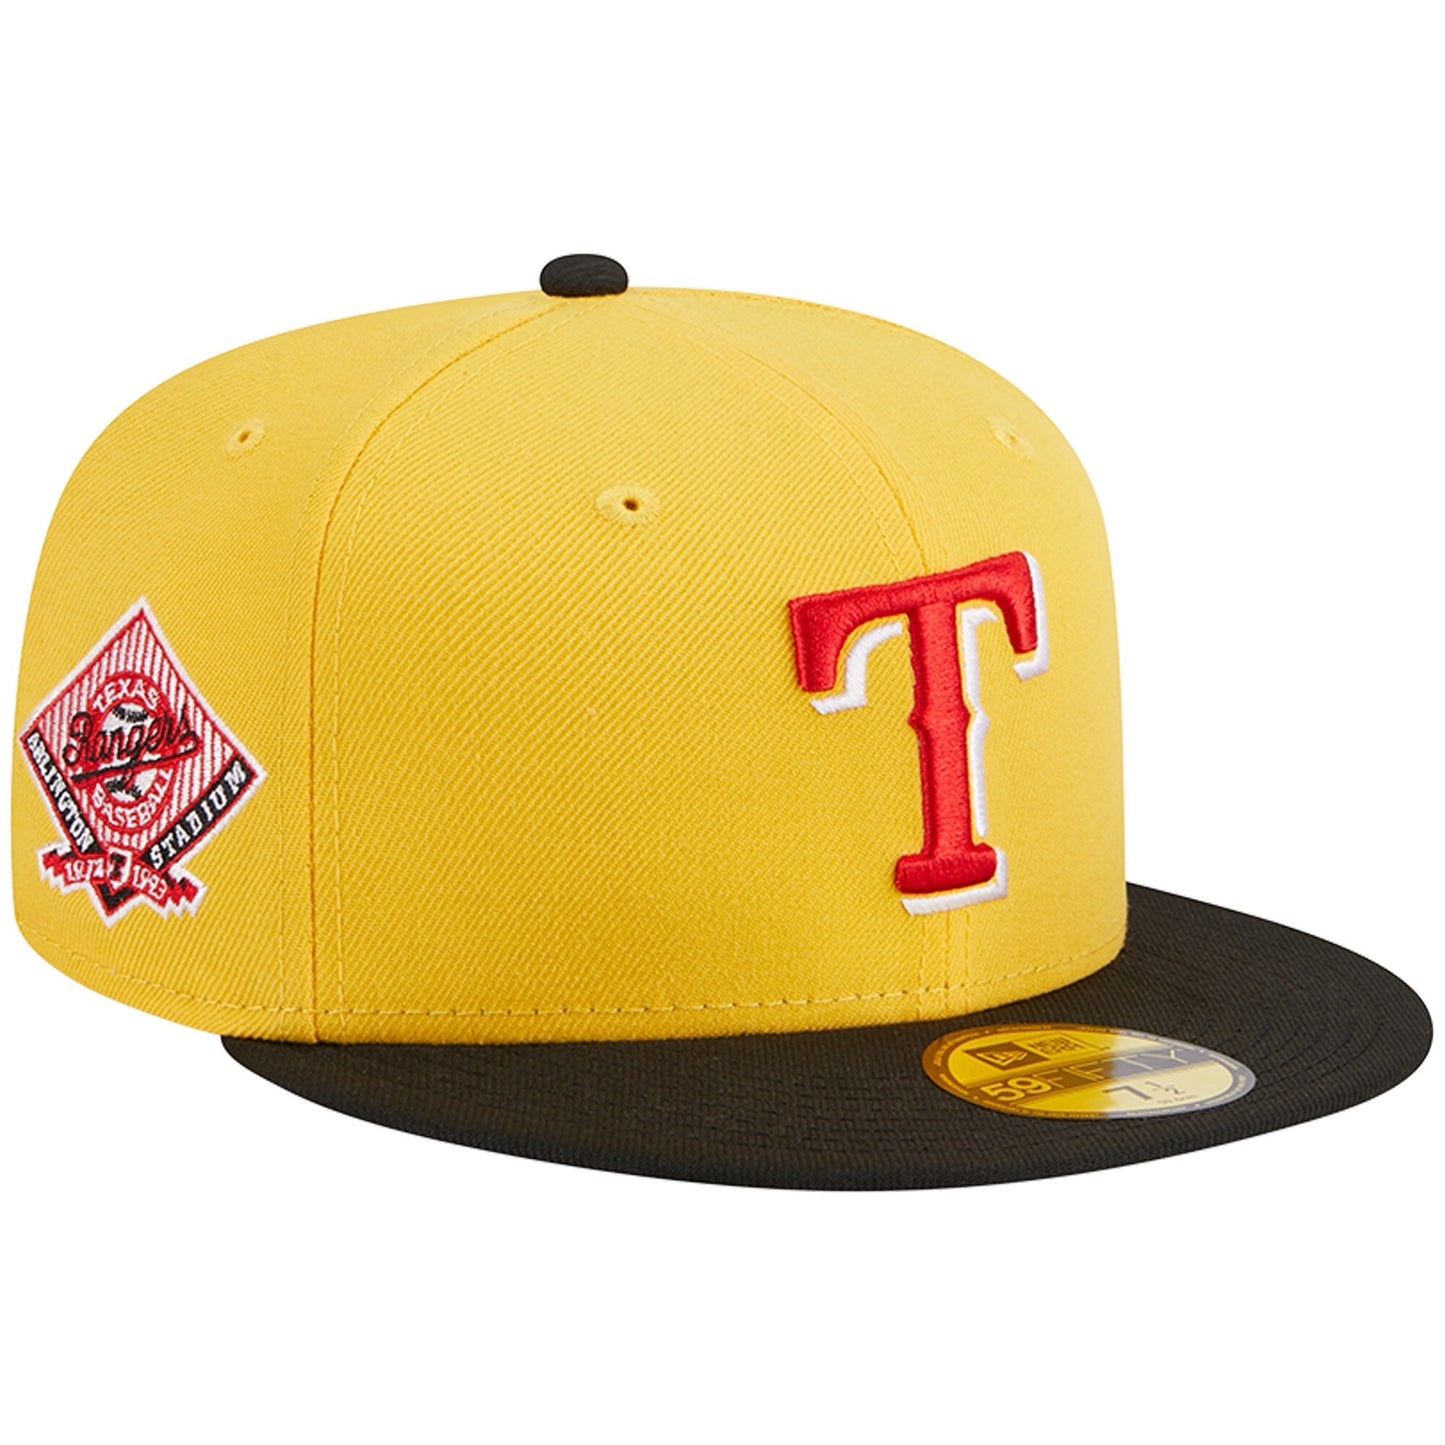 Texas Rangers New Era Grilled 59FIFTY Fitted Hat - Yellow/Black